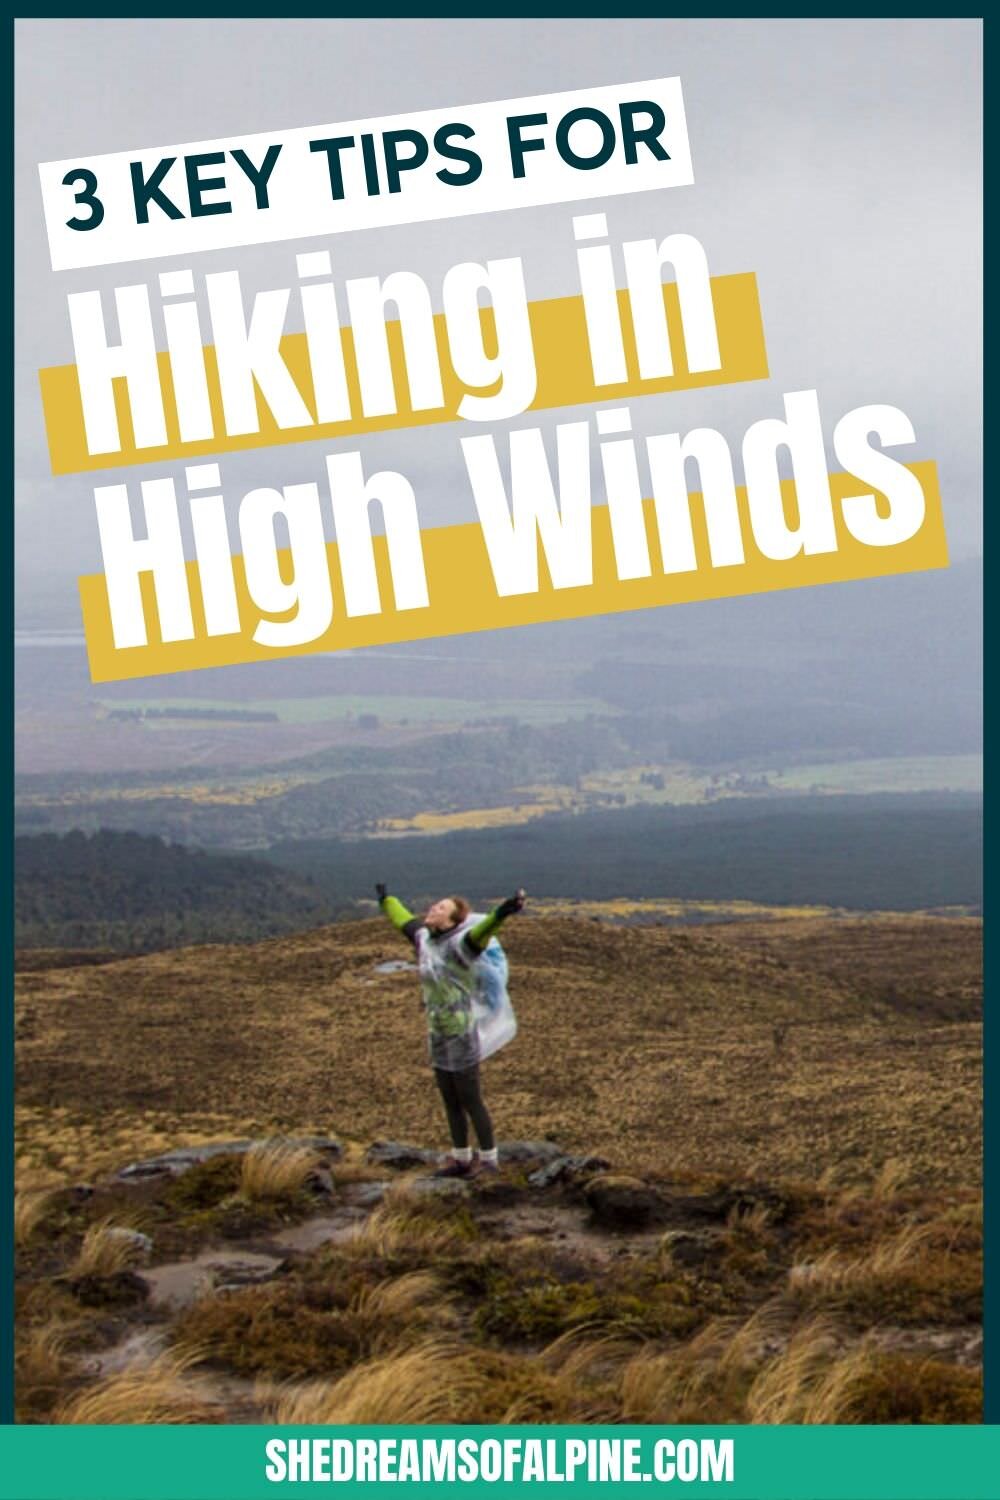 3 Key Tips for Confidently Hiking in High Winds